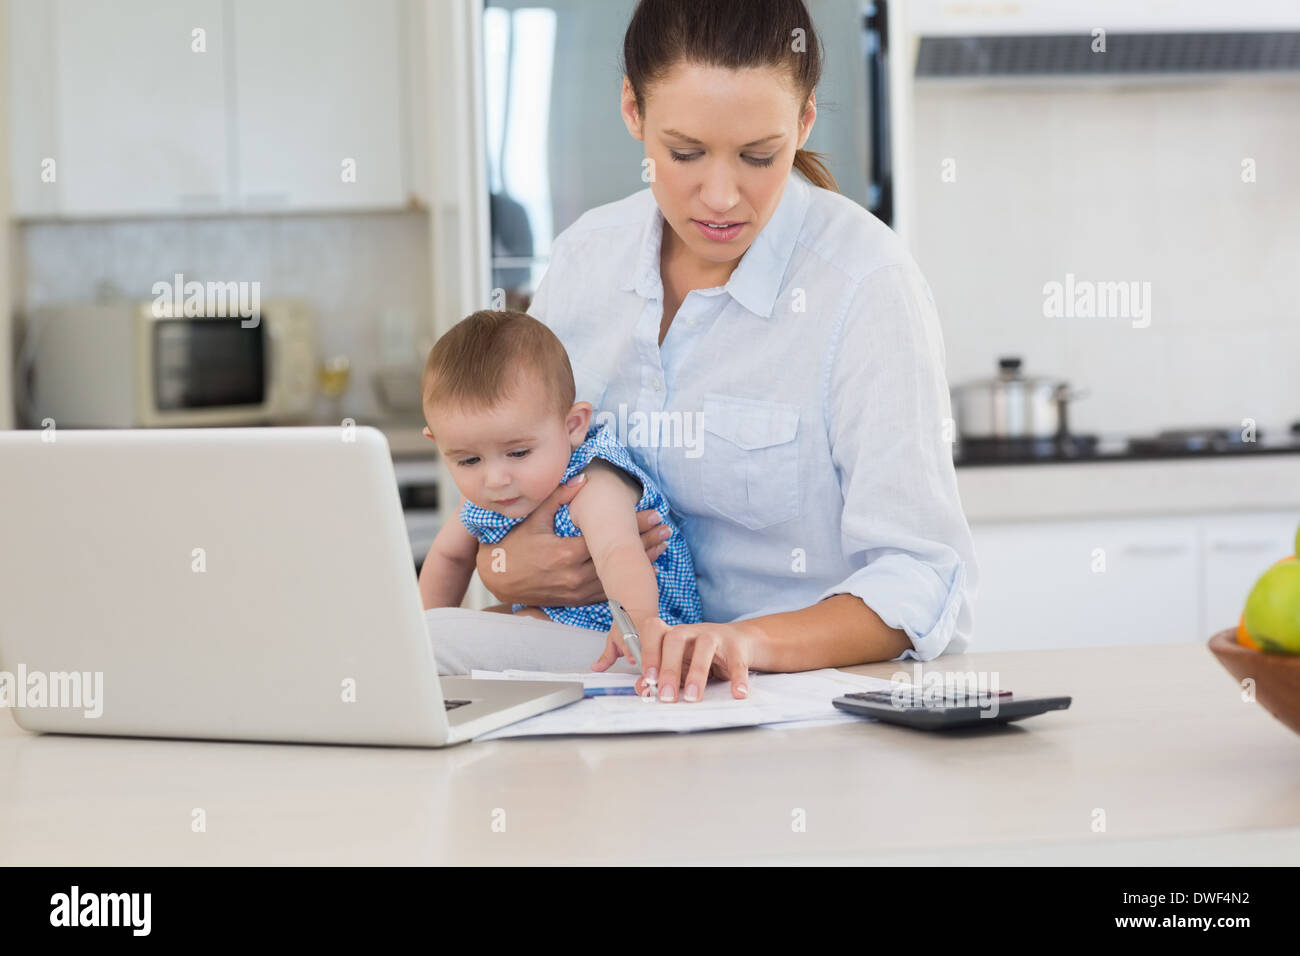 Mother holding baby while calculating home finances Stock Photo